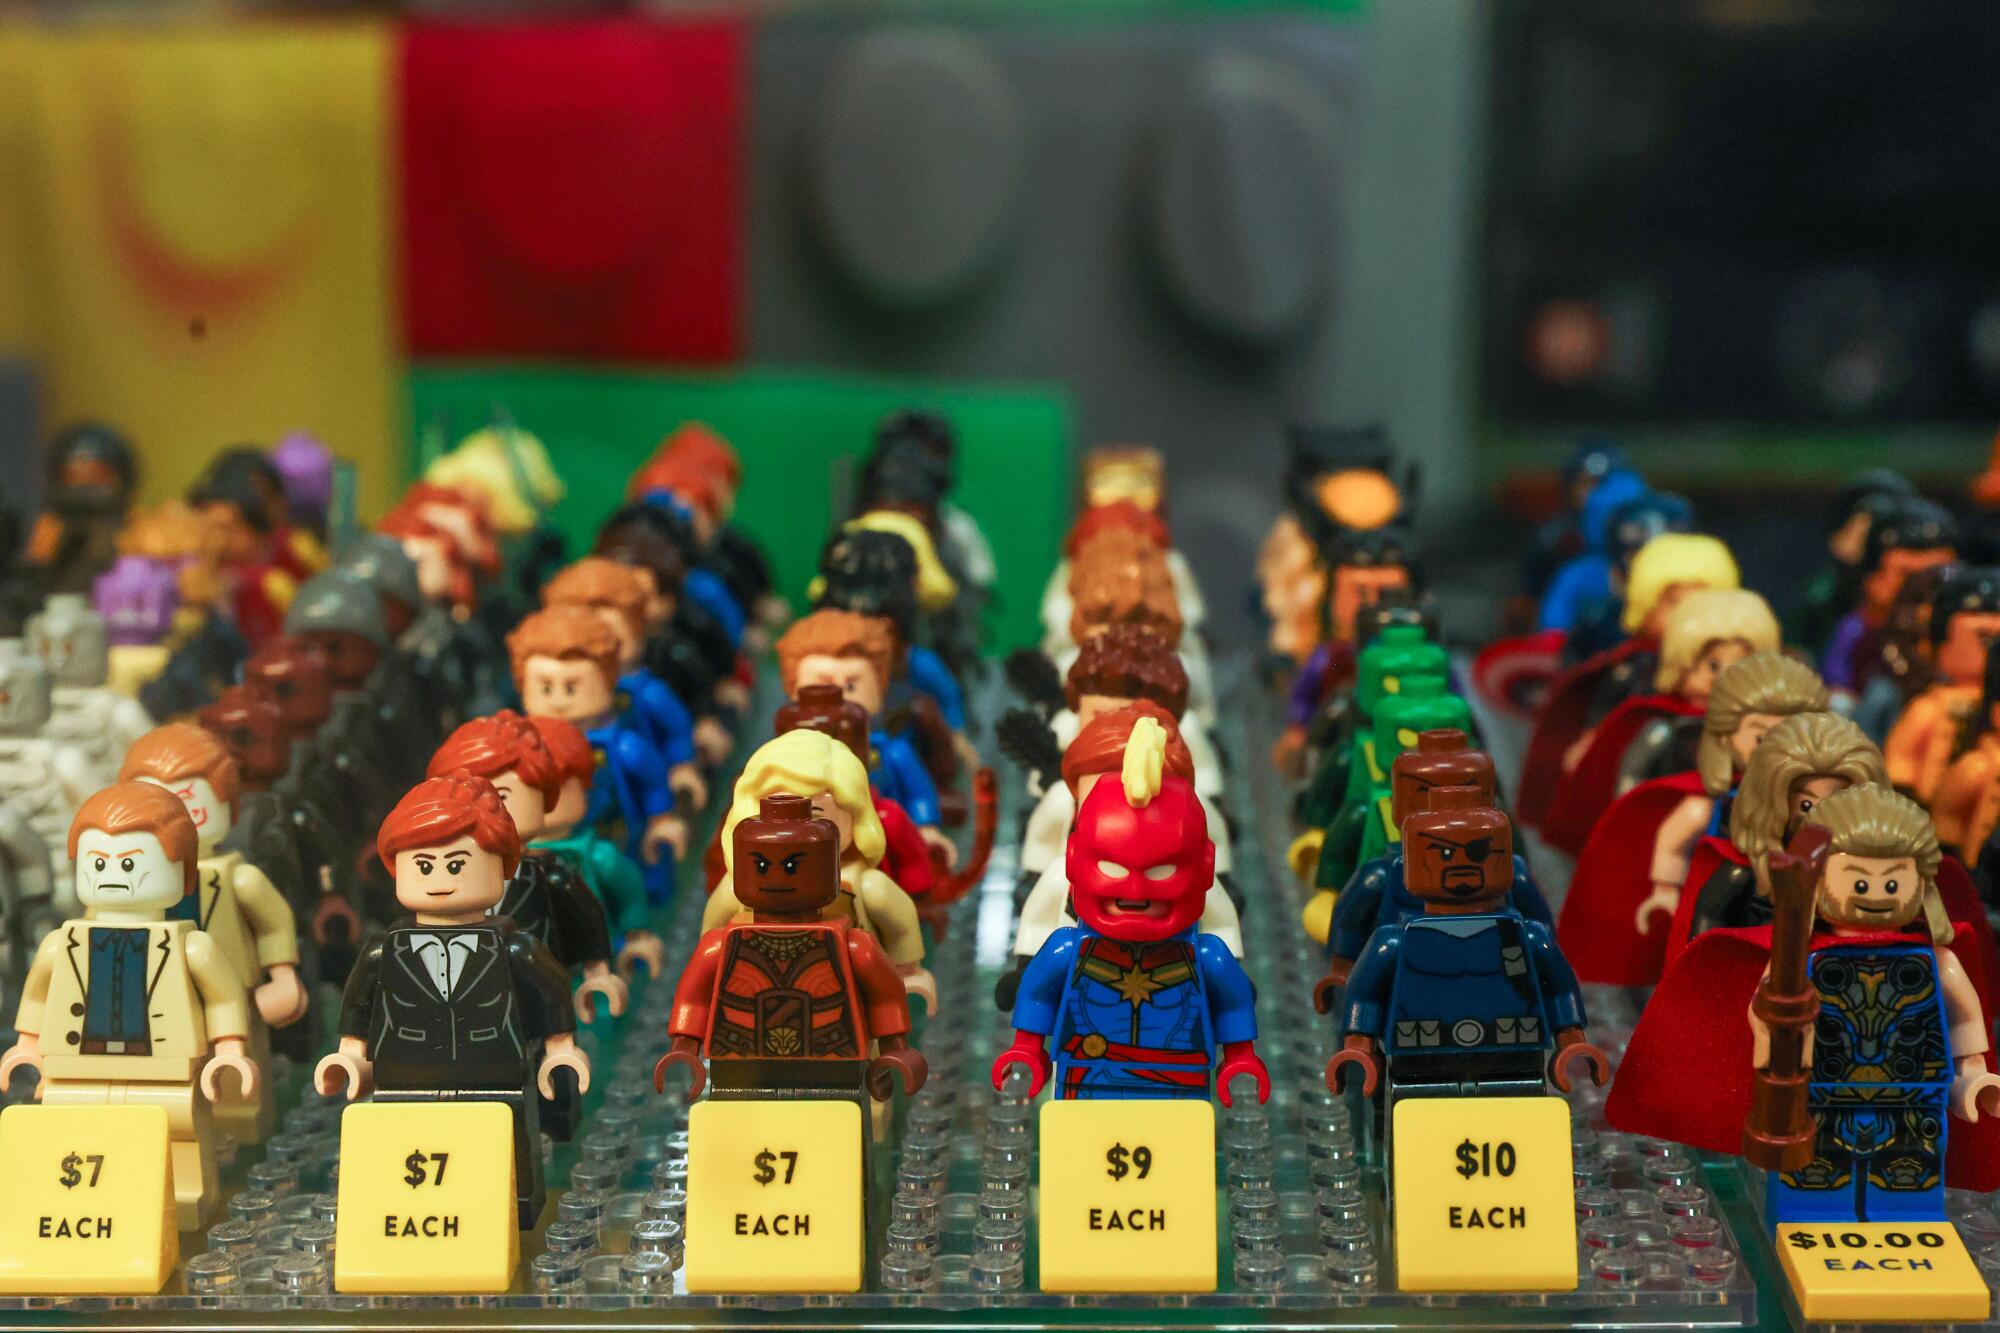 Lego mini-figures are displayed with price tags ranging from $7 to $10 each at Bricks & Minifigs in Whittier.